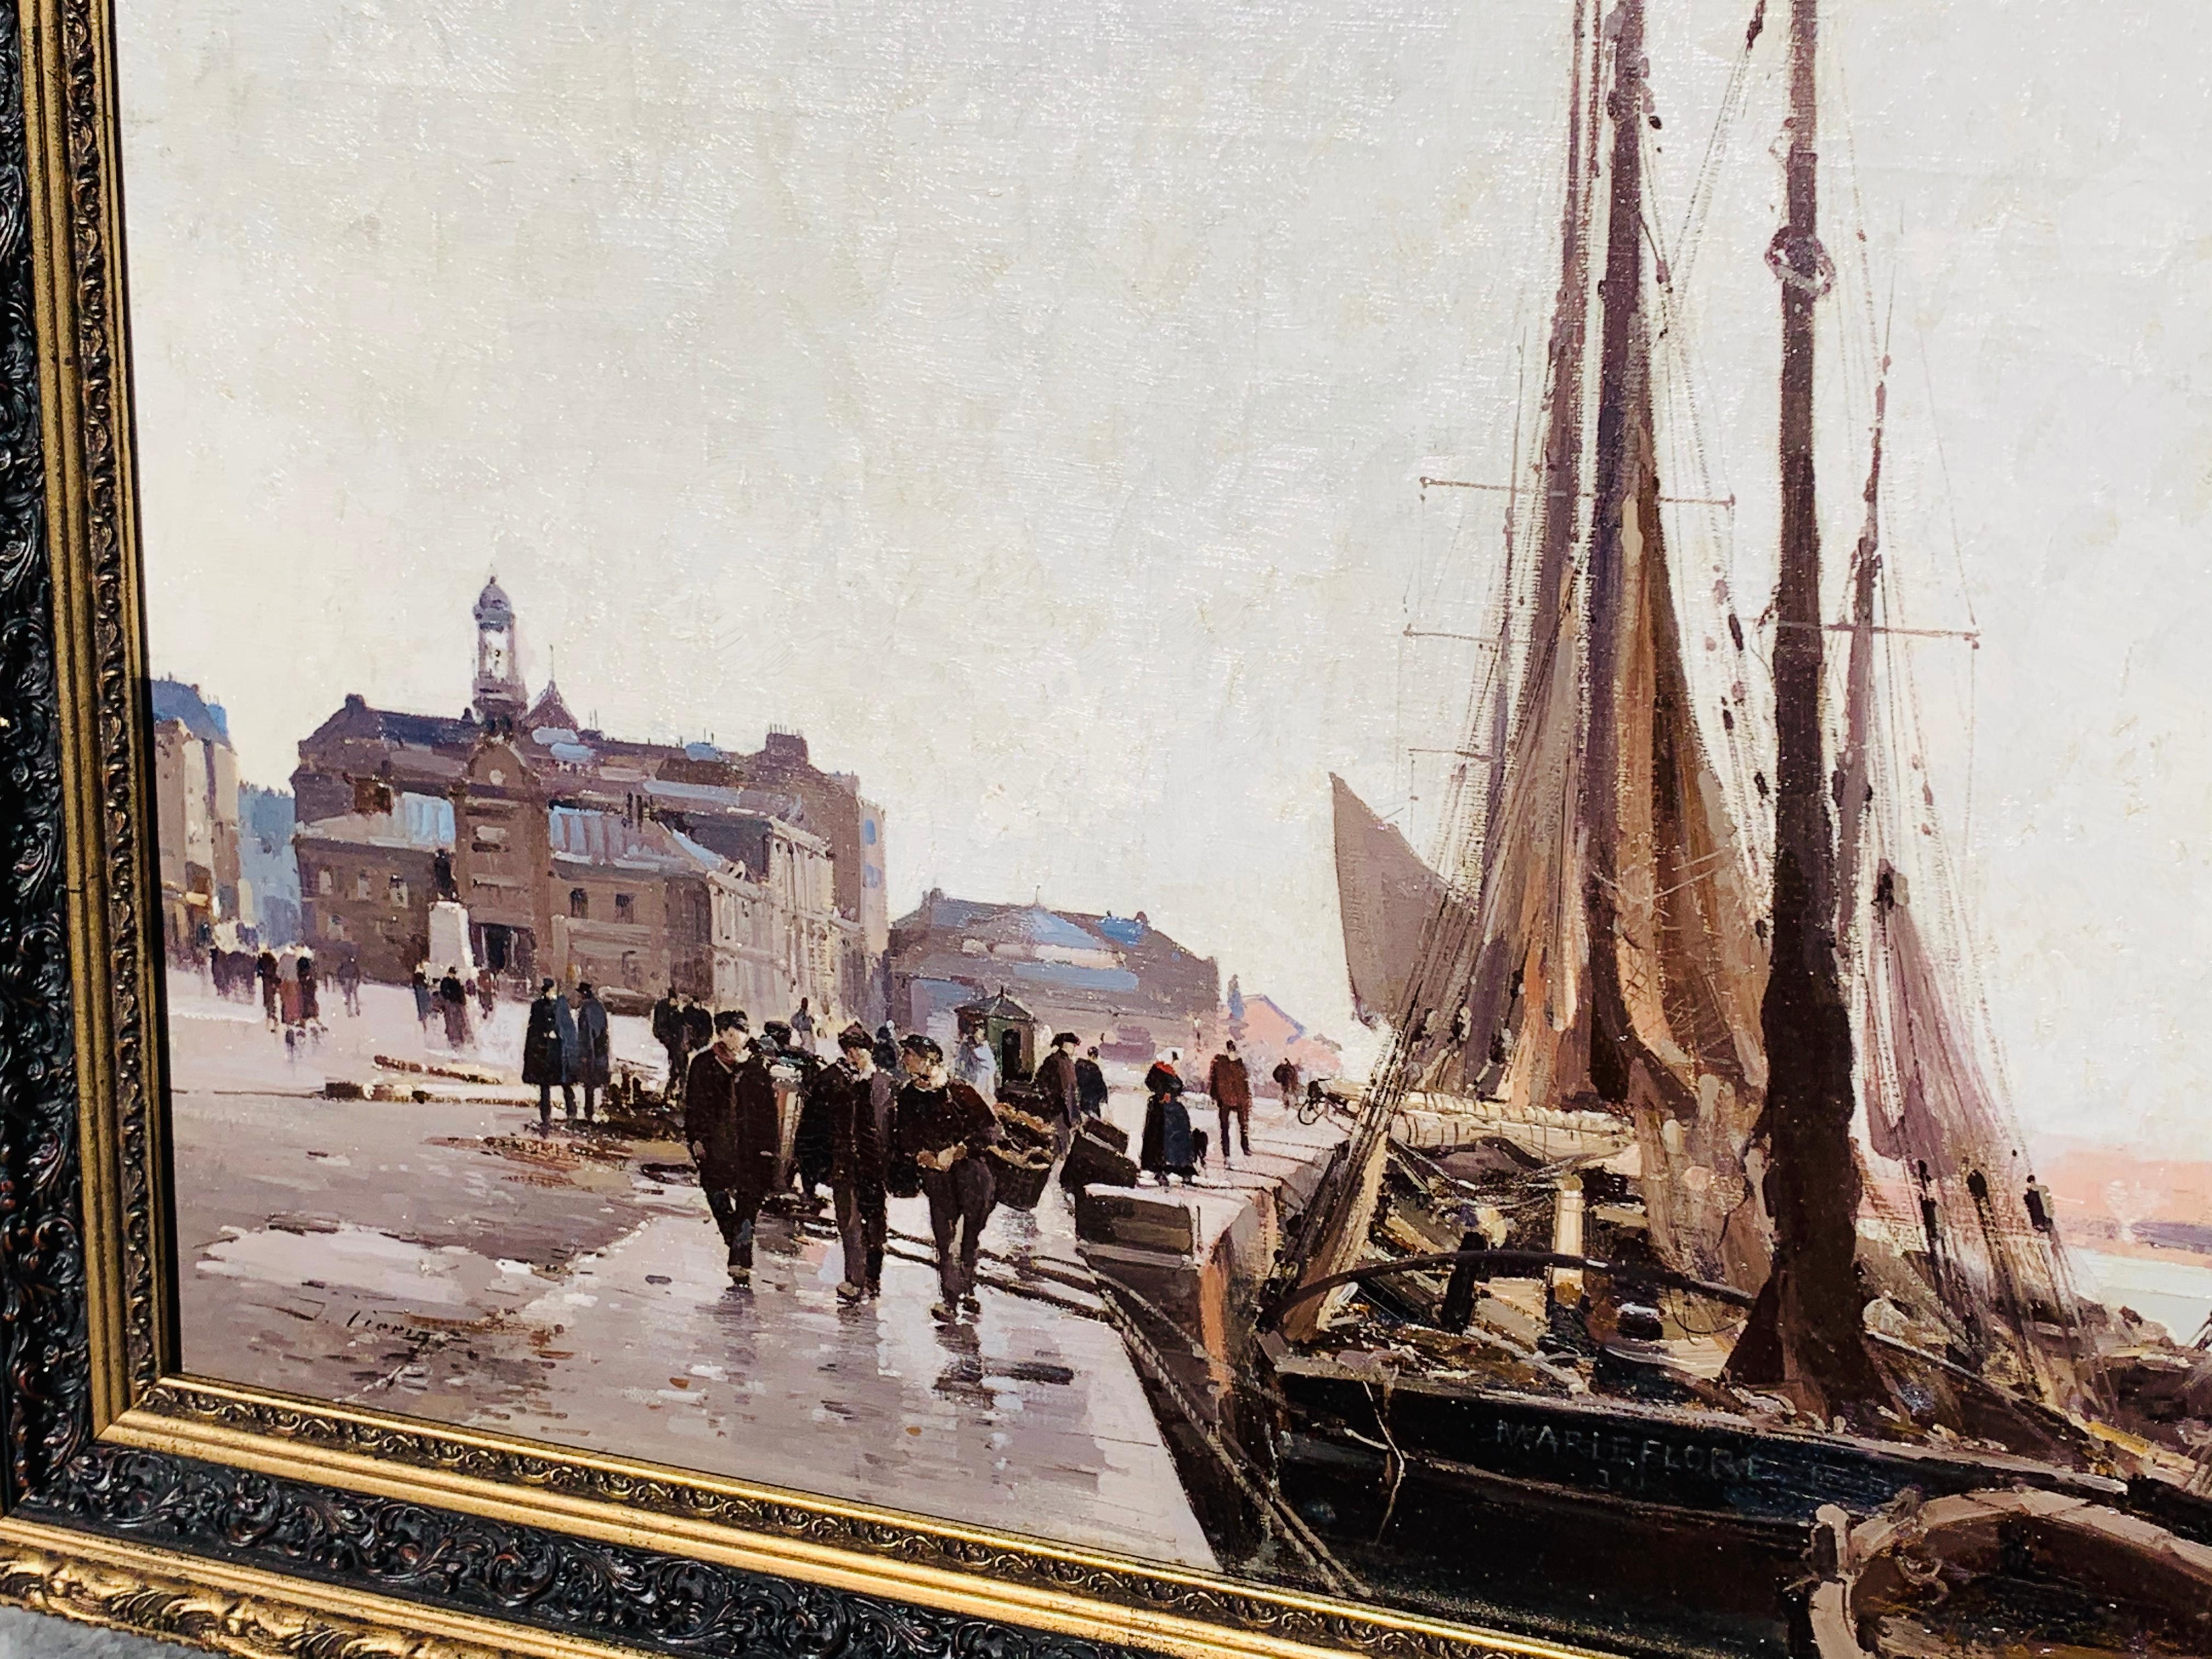 19th century French painting - The docks in Bordeaux - Painting by Eugene Galien-Laloue